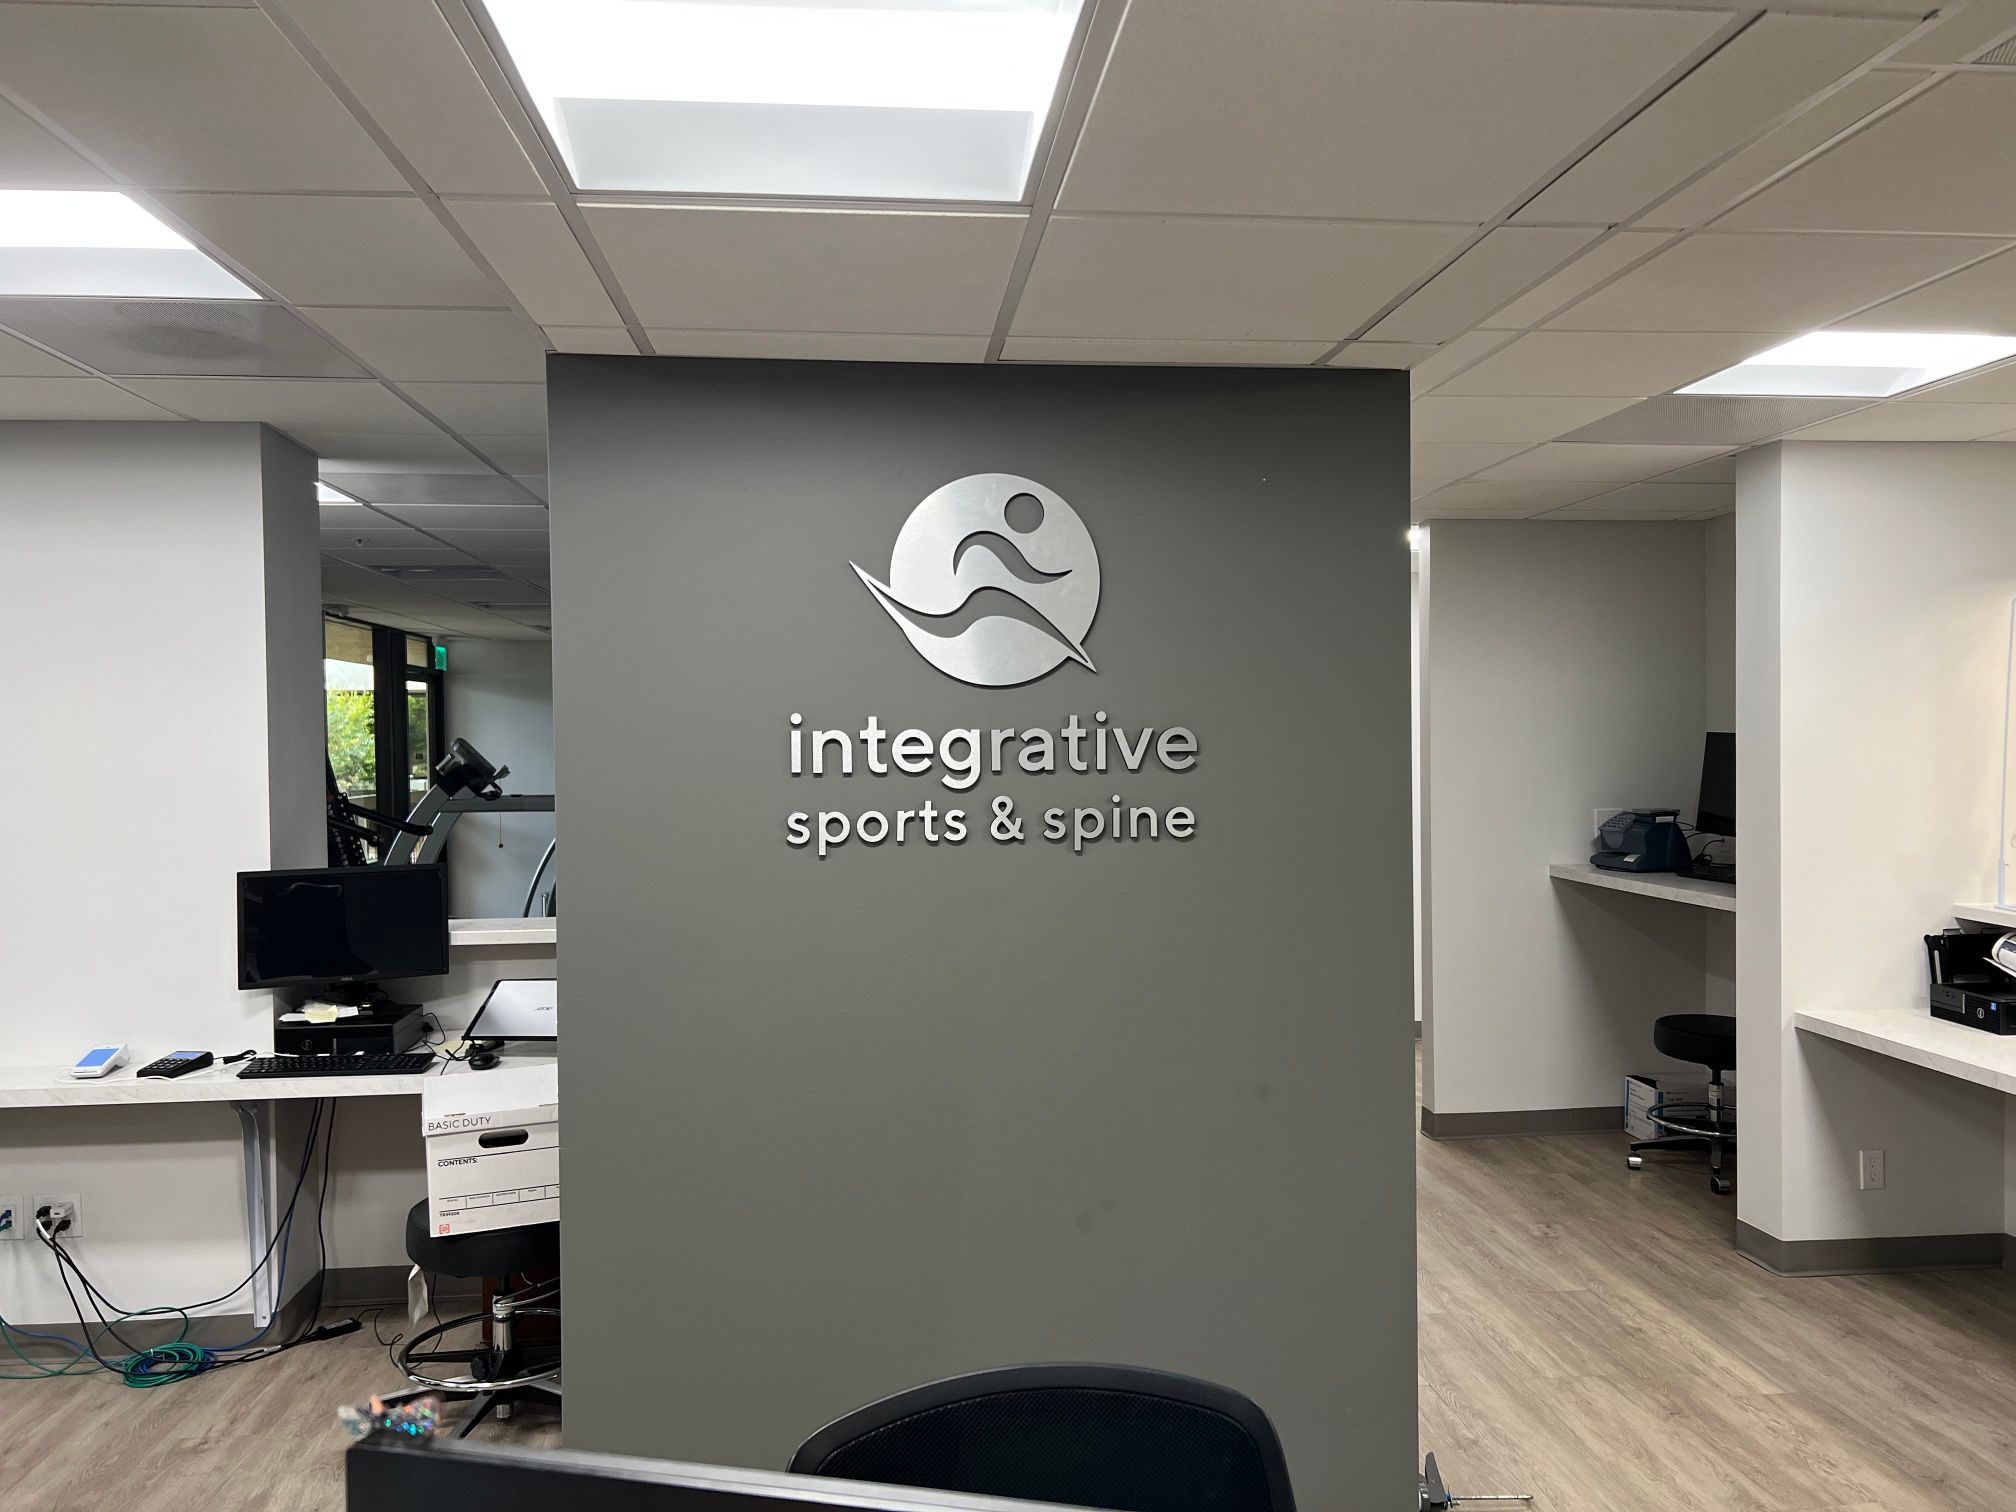 Our team visited Integrative Sports and Spine at the beginning of the year. The client asked our shop to create window graphics as a low-cost advertising solution. Now, the client invited us to return and fabricate one of our brushed metal lobby logo signs for offices in Long Beach CA